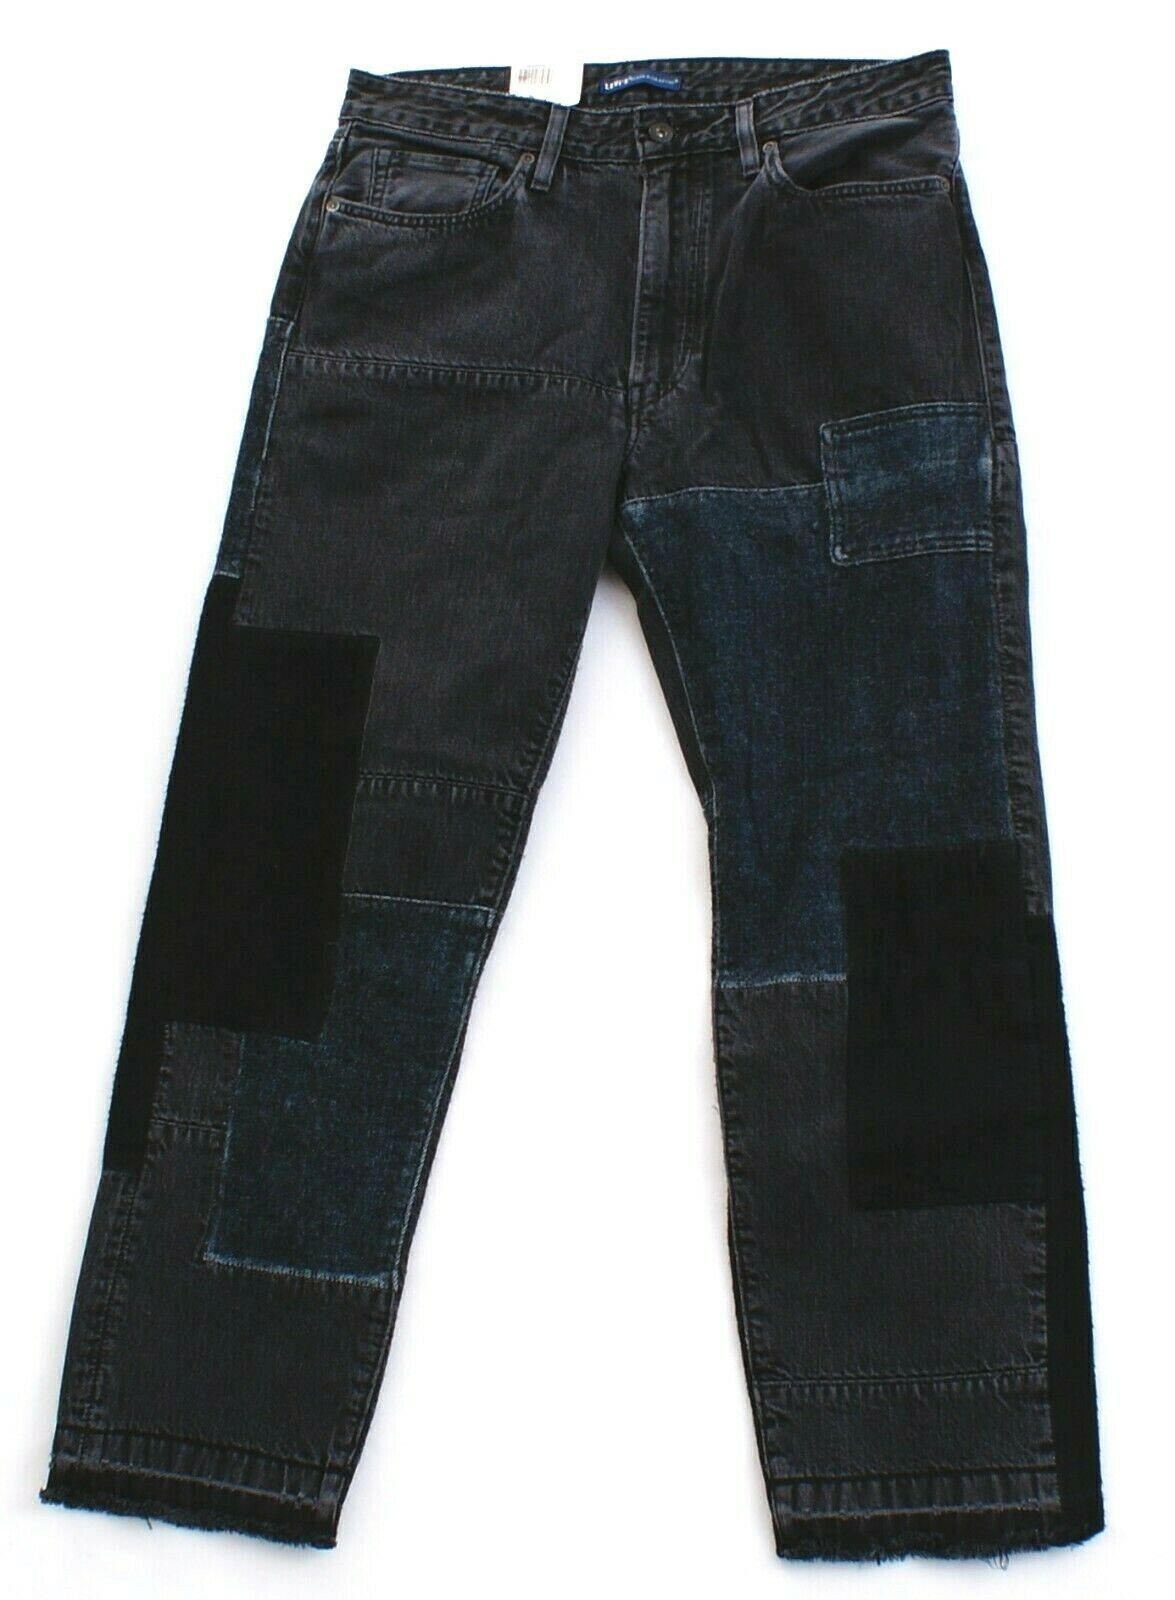 Levi's Made & Crafted Rail Straight Vintage Patchwork Denim Jeans Men's ...